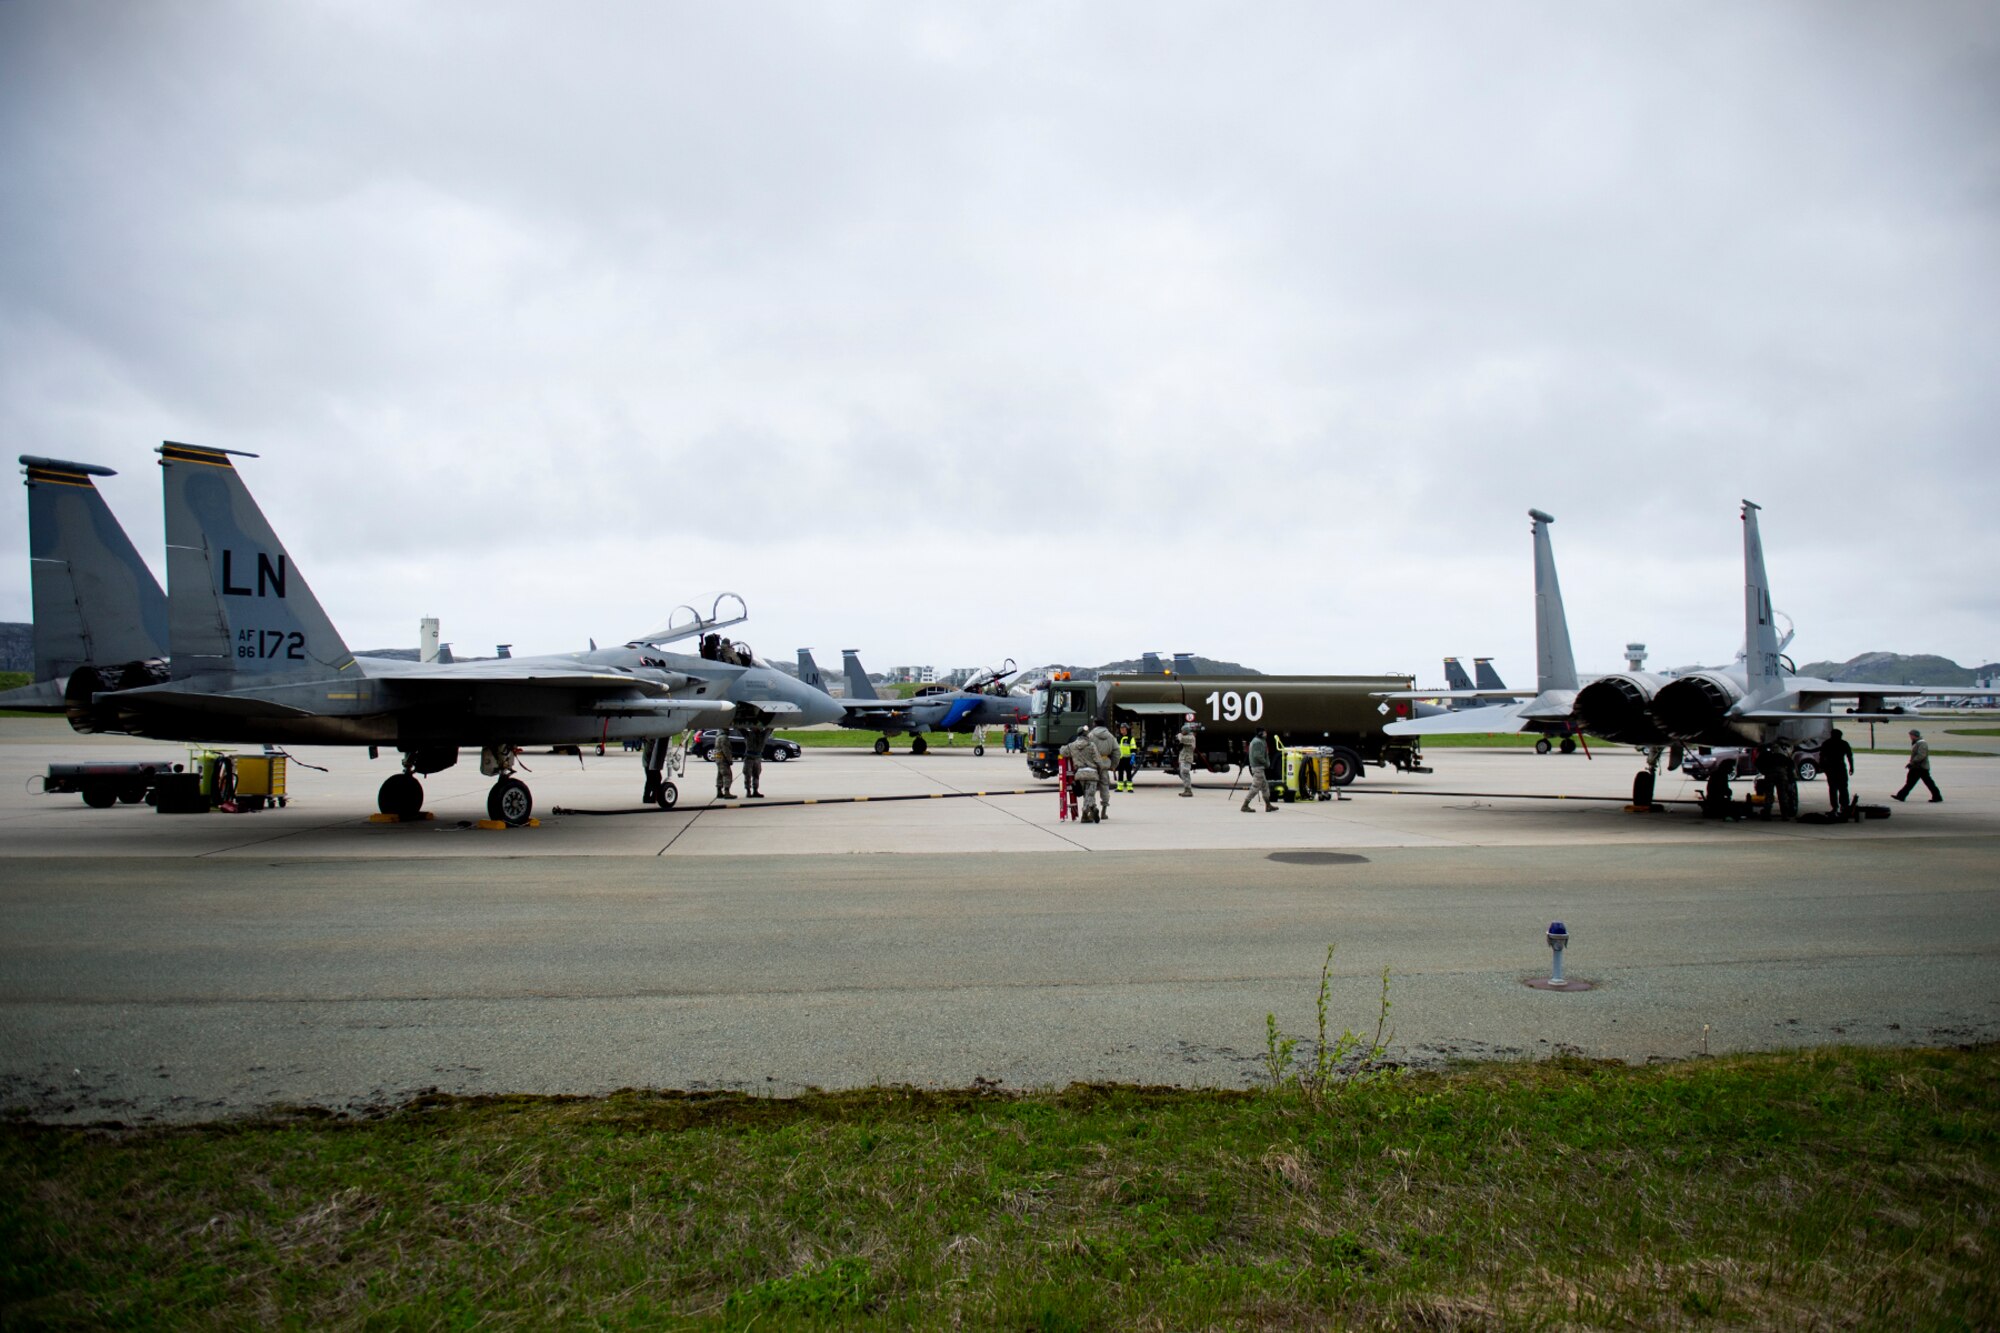 Royal Norwegian Air Force members refuel two 493rd Fighter Squadron F-15 C Eagles during training exercise Arctic Fighter Meet 2016, Bodø Main Air Station, Norway, May 25, 2016. This training exercise allowed forward-based U.S. Airmen and aircraft from RAF Lakenheath to train with NATO Allies and European partners, building on skill sets and improving every nation's ability to seamlessly work together. (U.S. Air Force photo/Senior Airman Erin Babis)